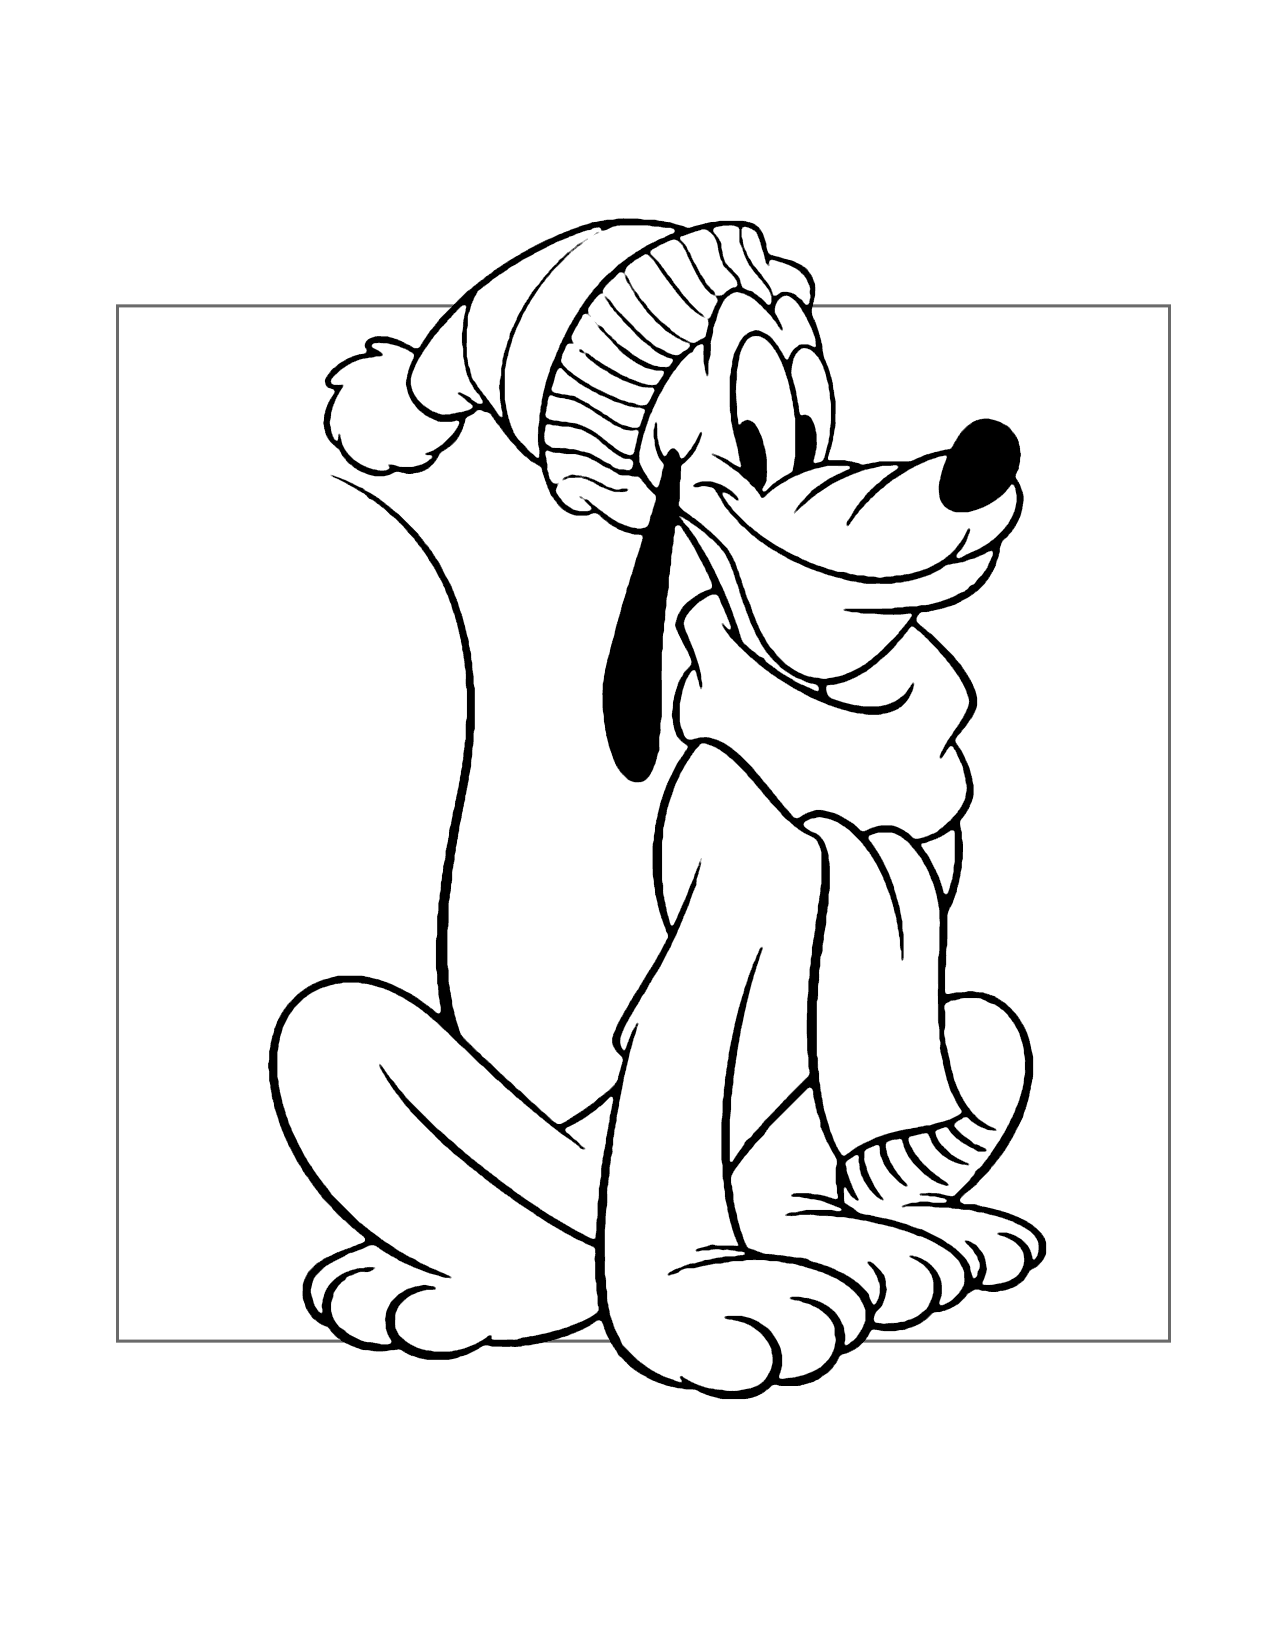 Pluto Is Dressed For Winter Coloring Page